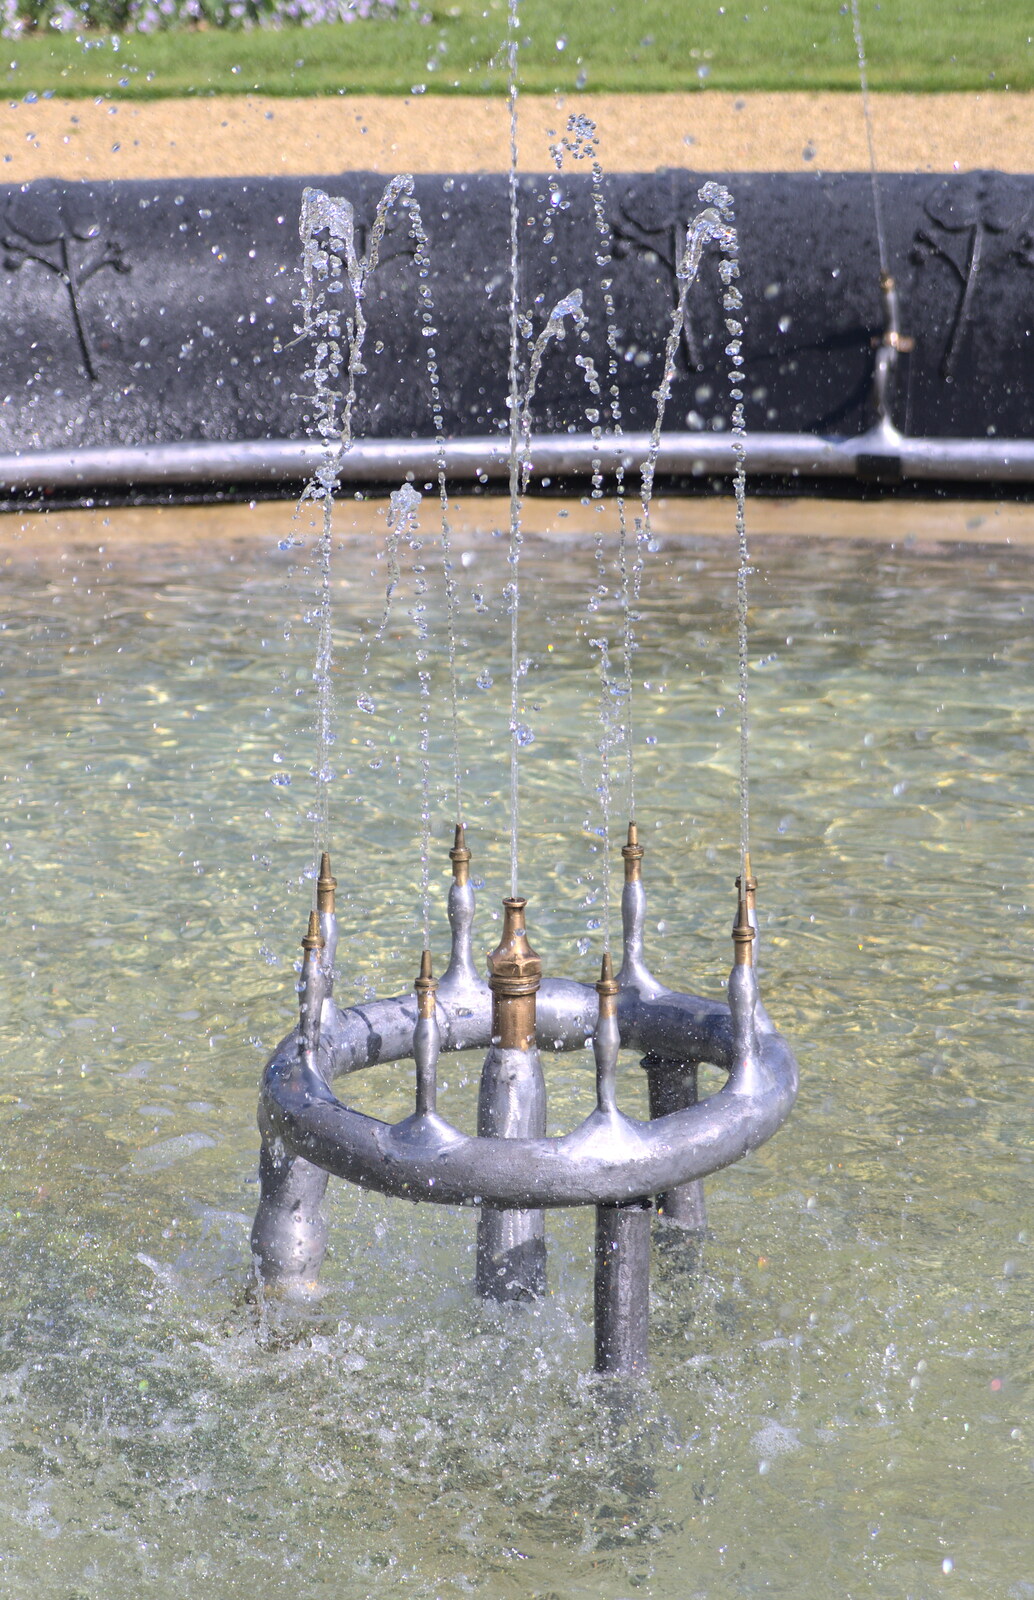 A fountain from A Trip to Audley End House, Saffron Walden, Essex - 16th April 2014